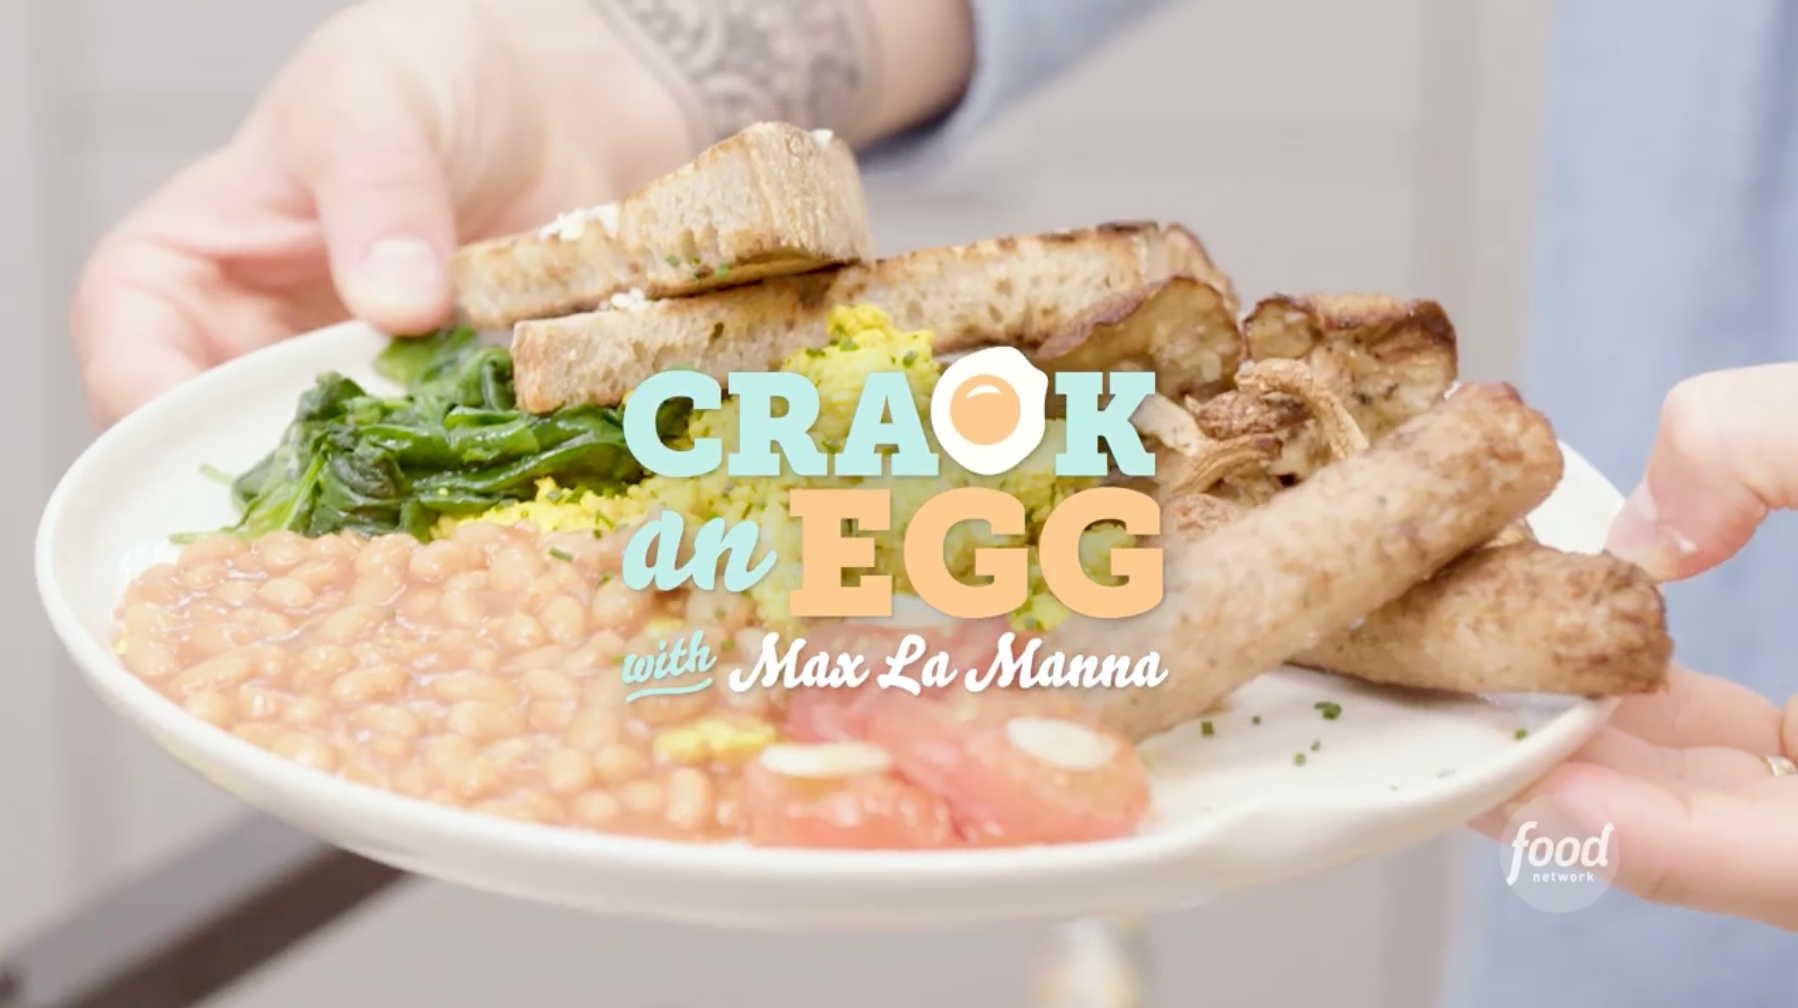 Food Network 'Crack an Egg with Max La Manna'